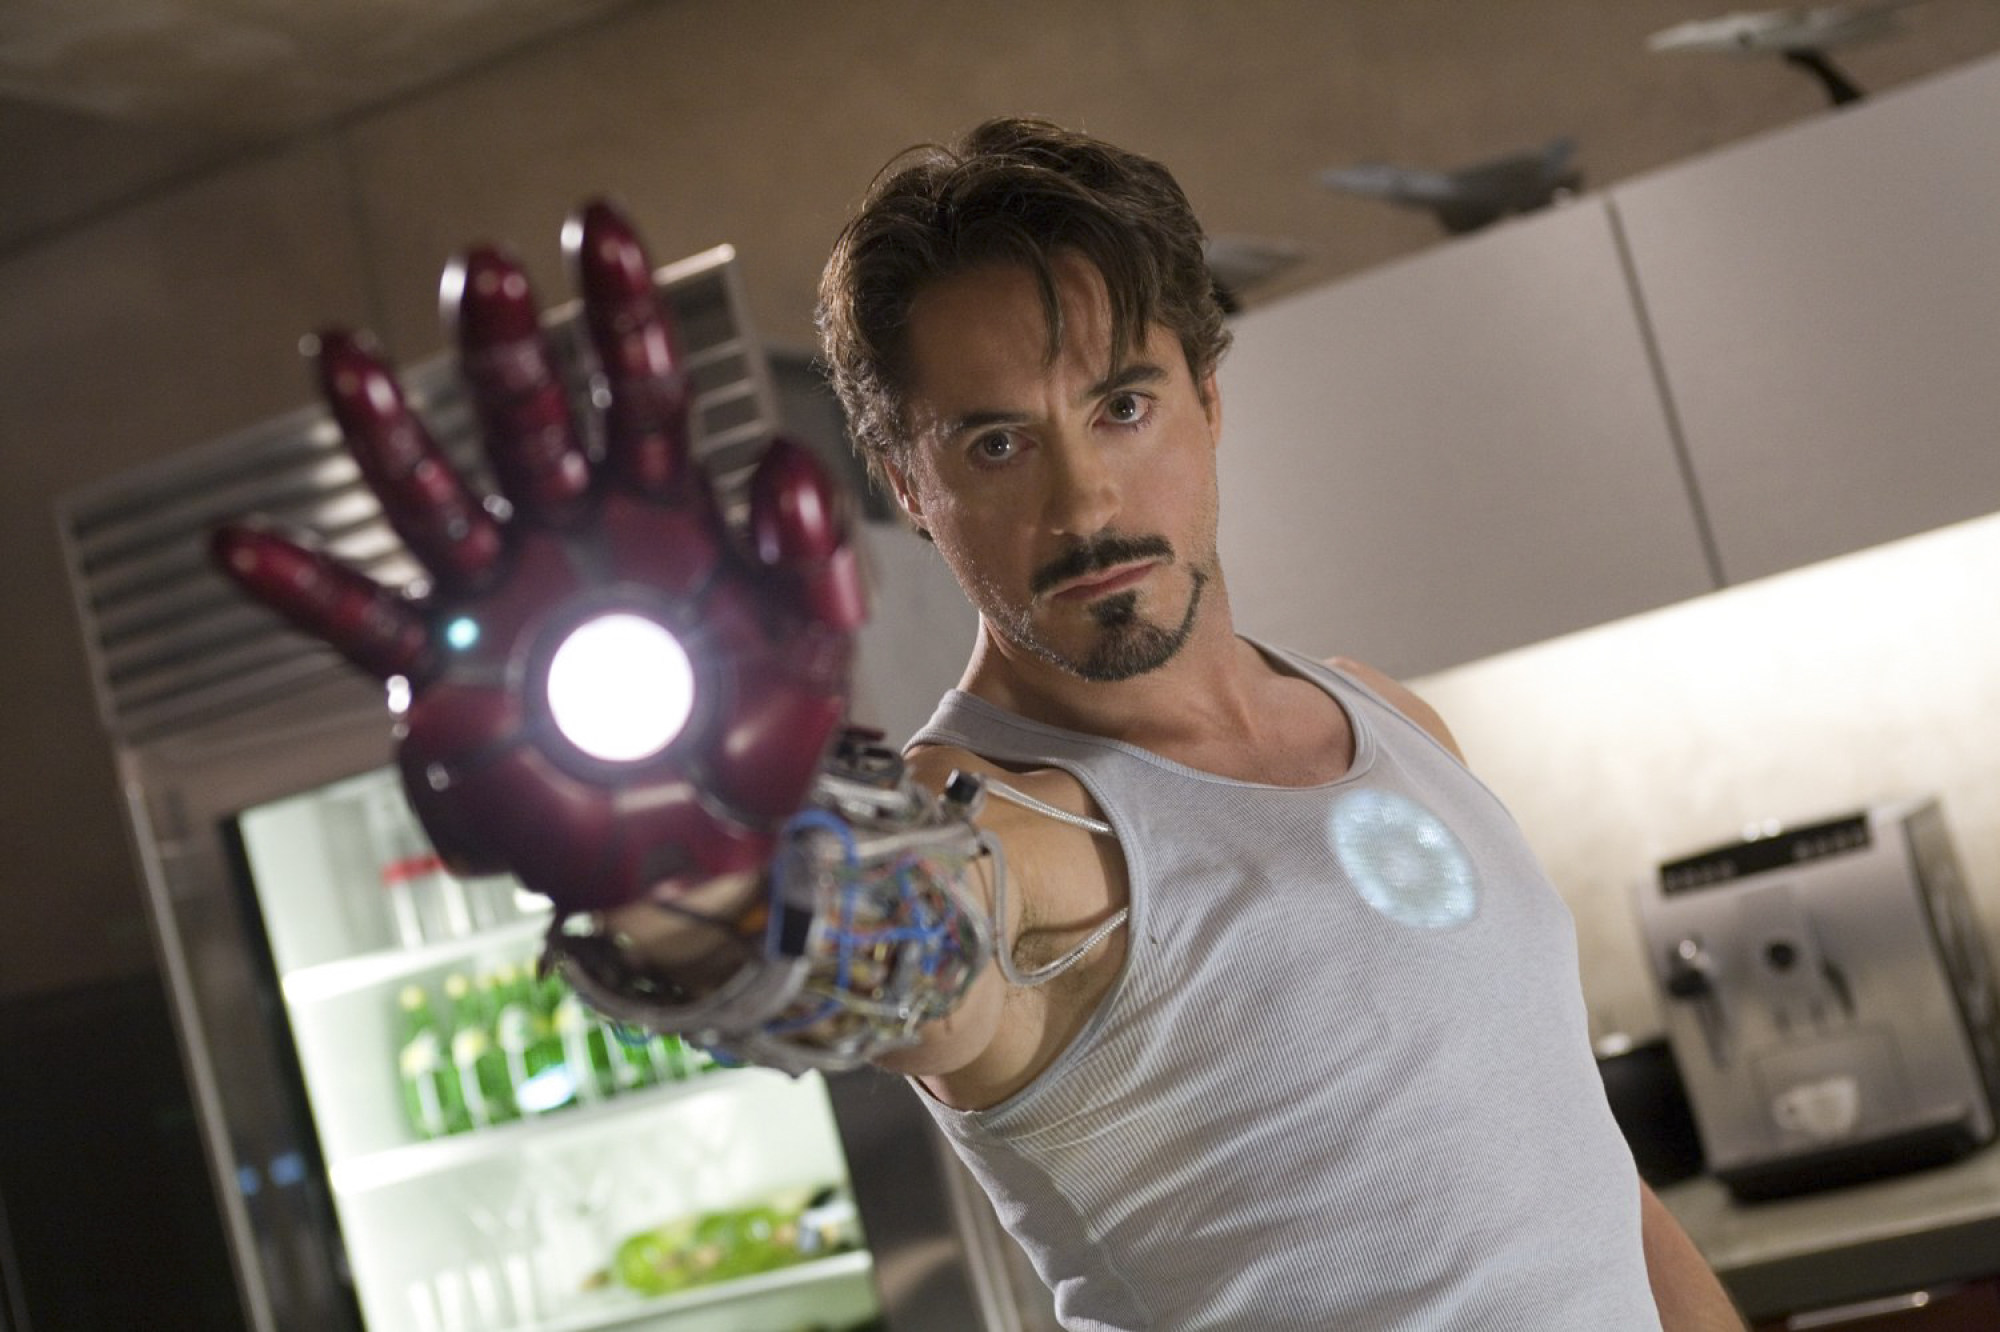 Iron Man 3 is when the MCU started getting experimental